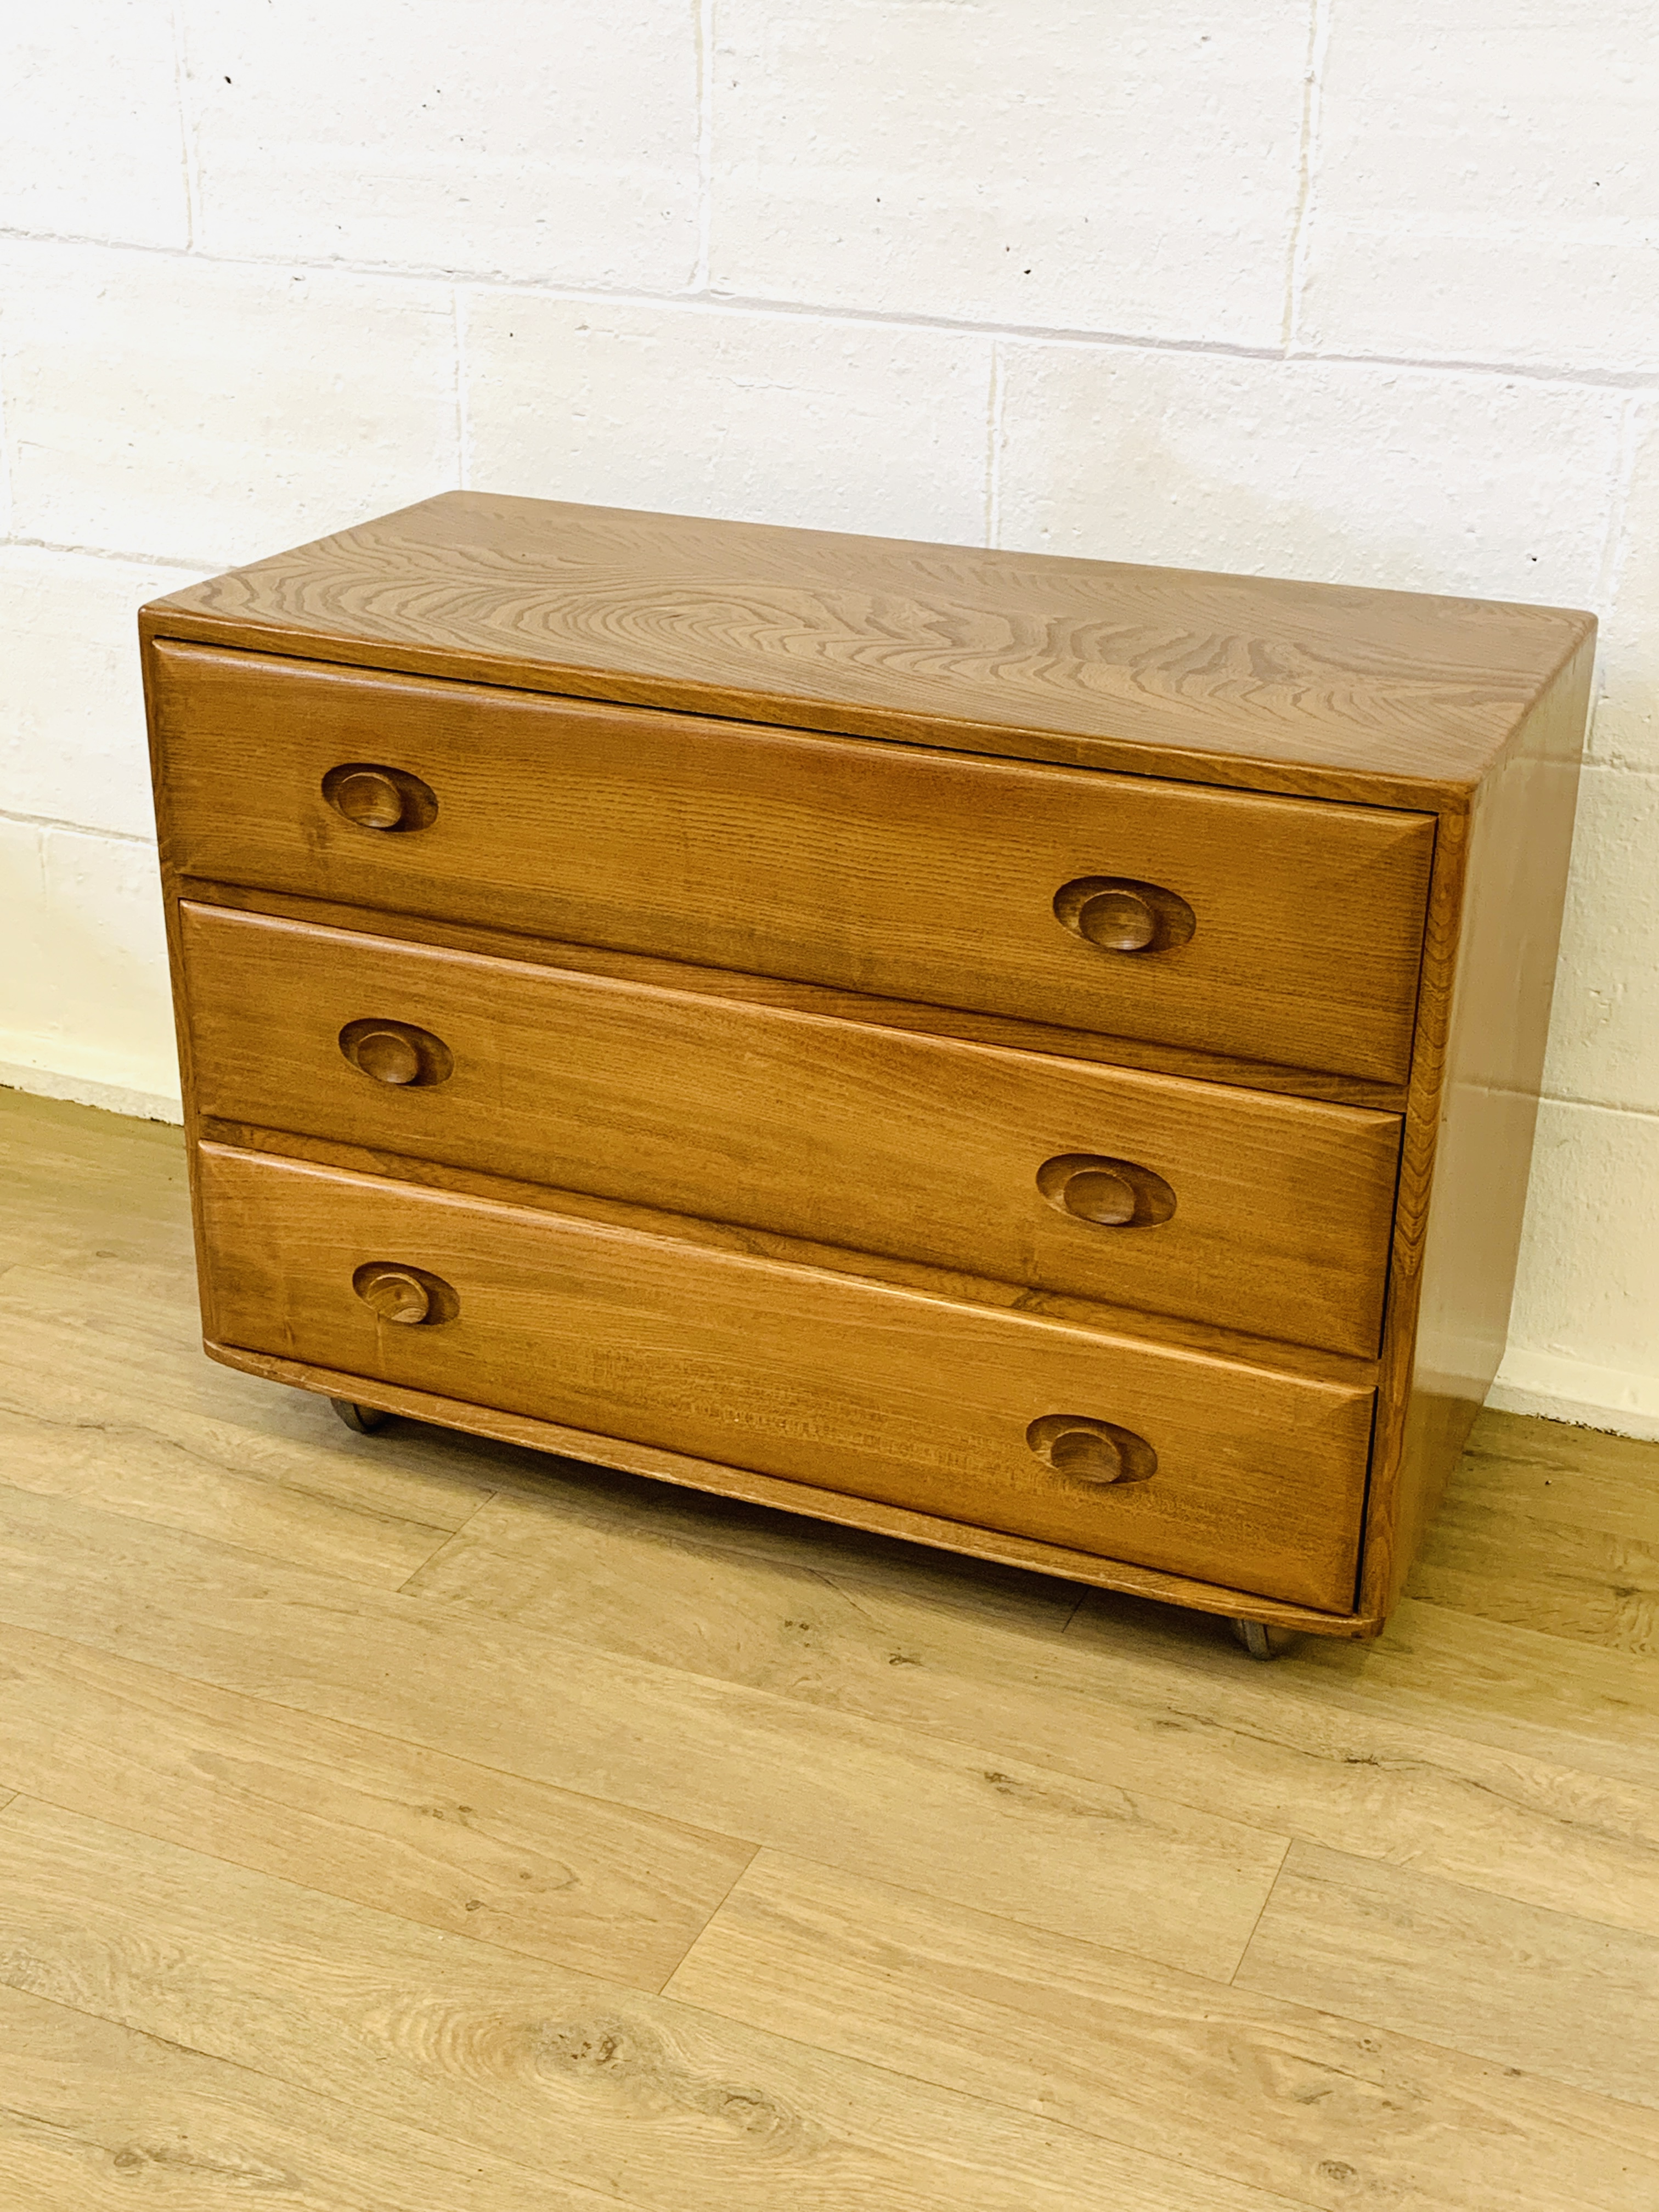 Ercol chest of drawers - Image 2 of 5